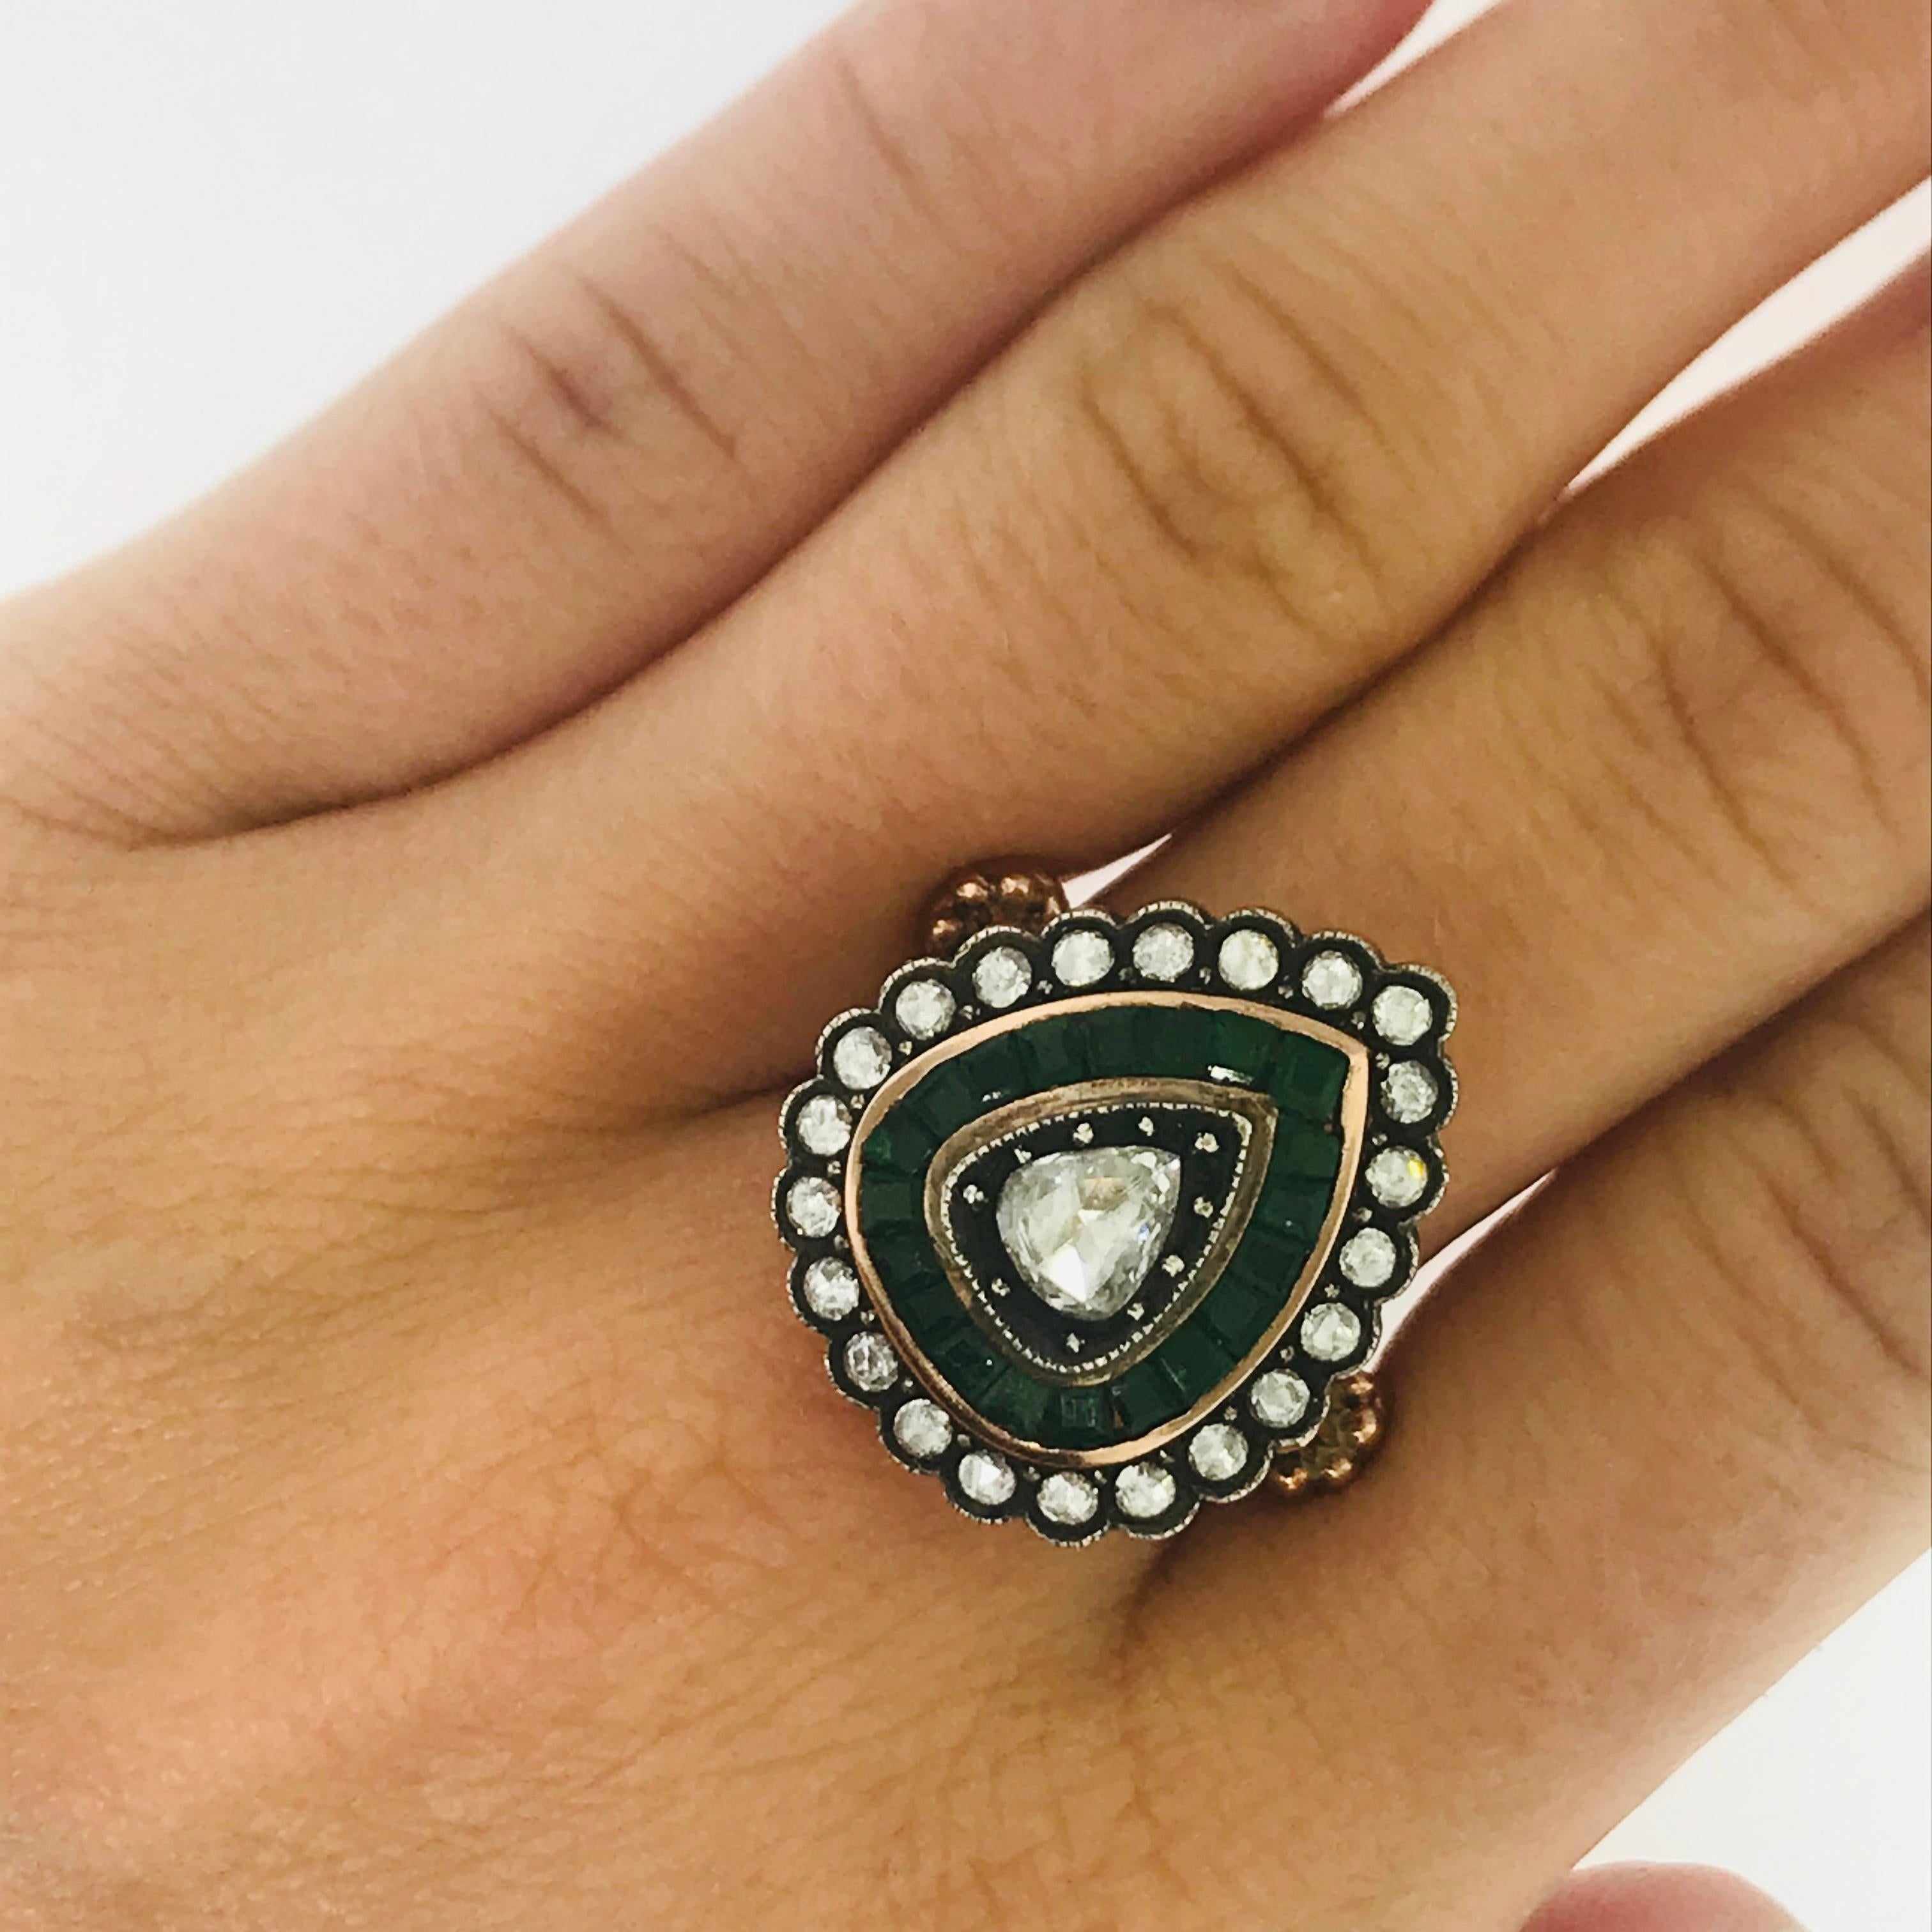 CIRCA 18th Century Diamond and Emerald Estate Ring-in stock, one-of-a-kind!
This is a very special piece that is one of a kind, ahead of its time, CIRCA 18th century and it's in immaculate condition! If you're a collector of unique estate pieces we